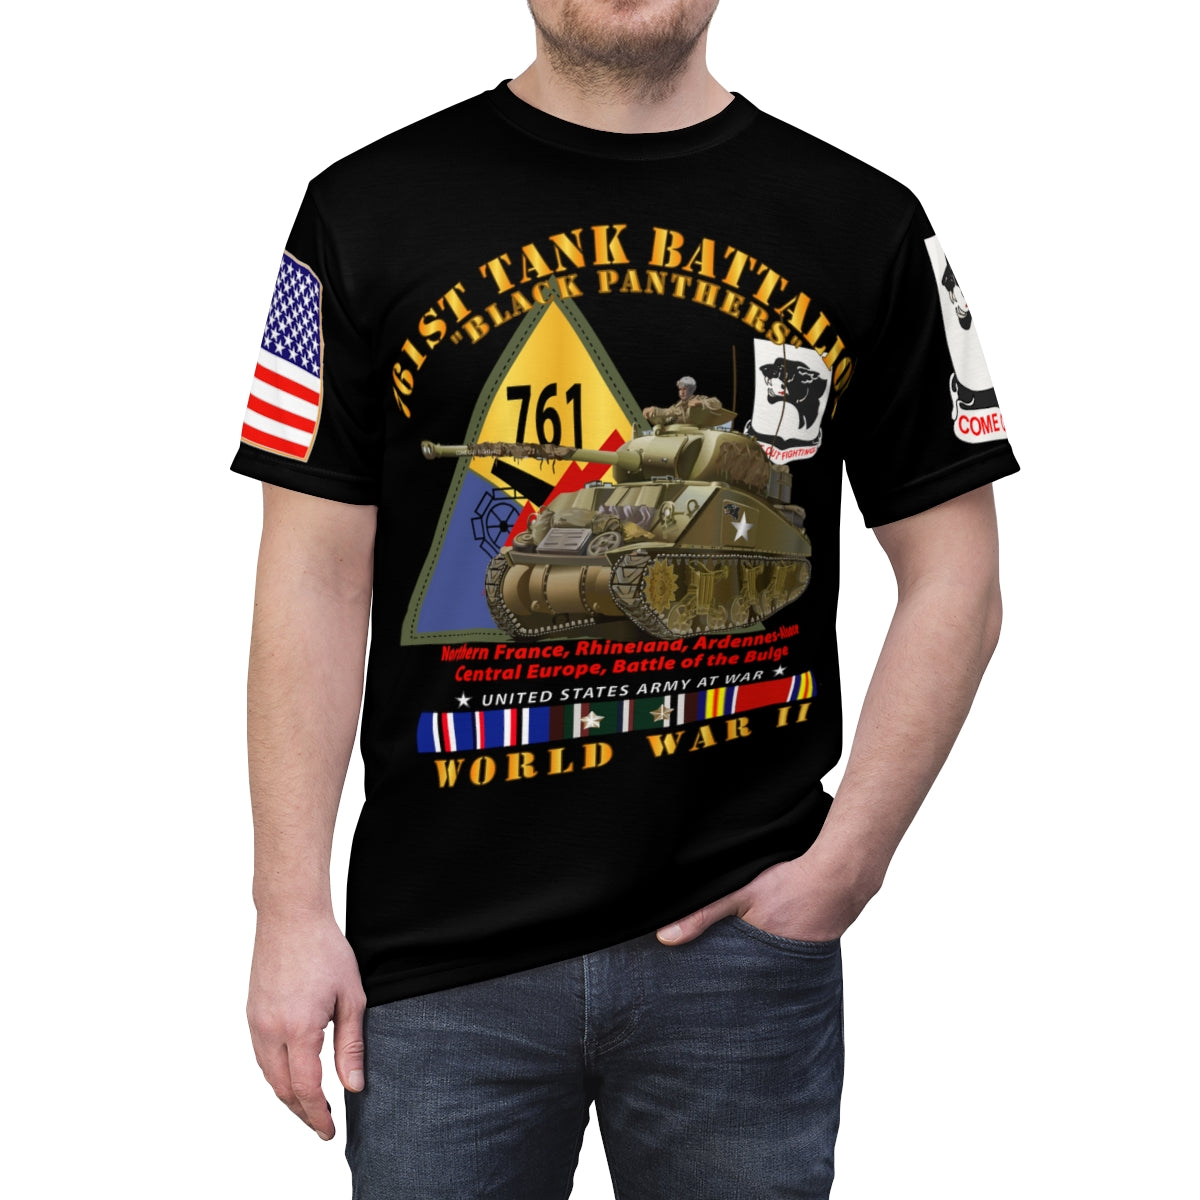 All Over Printing - 761st Tank Battalion - WWII - Black Panthers